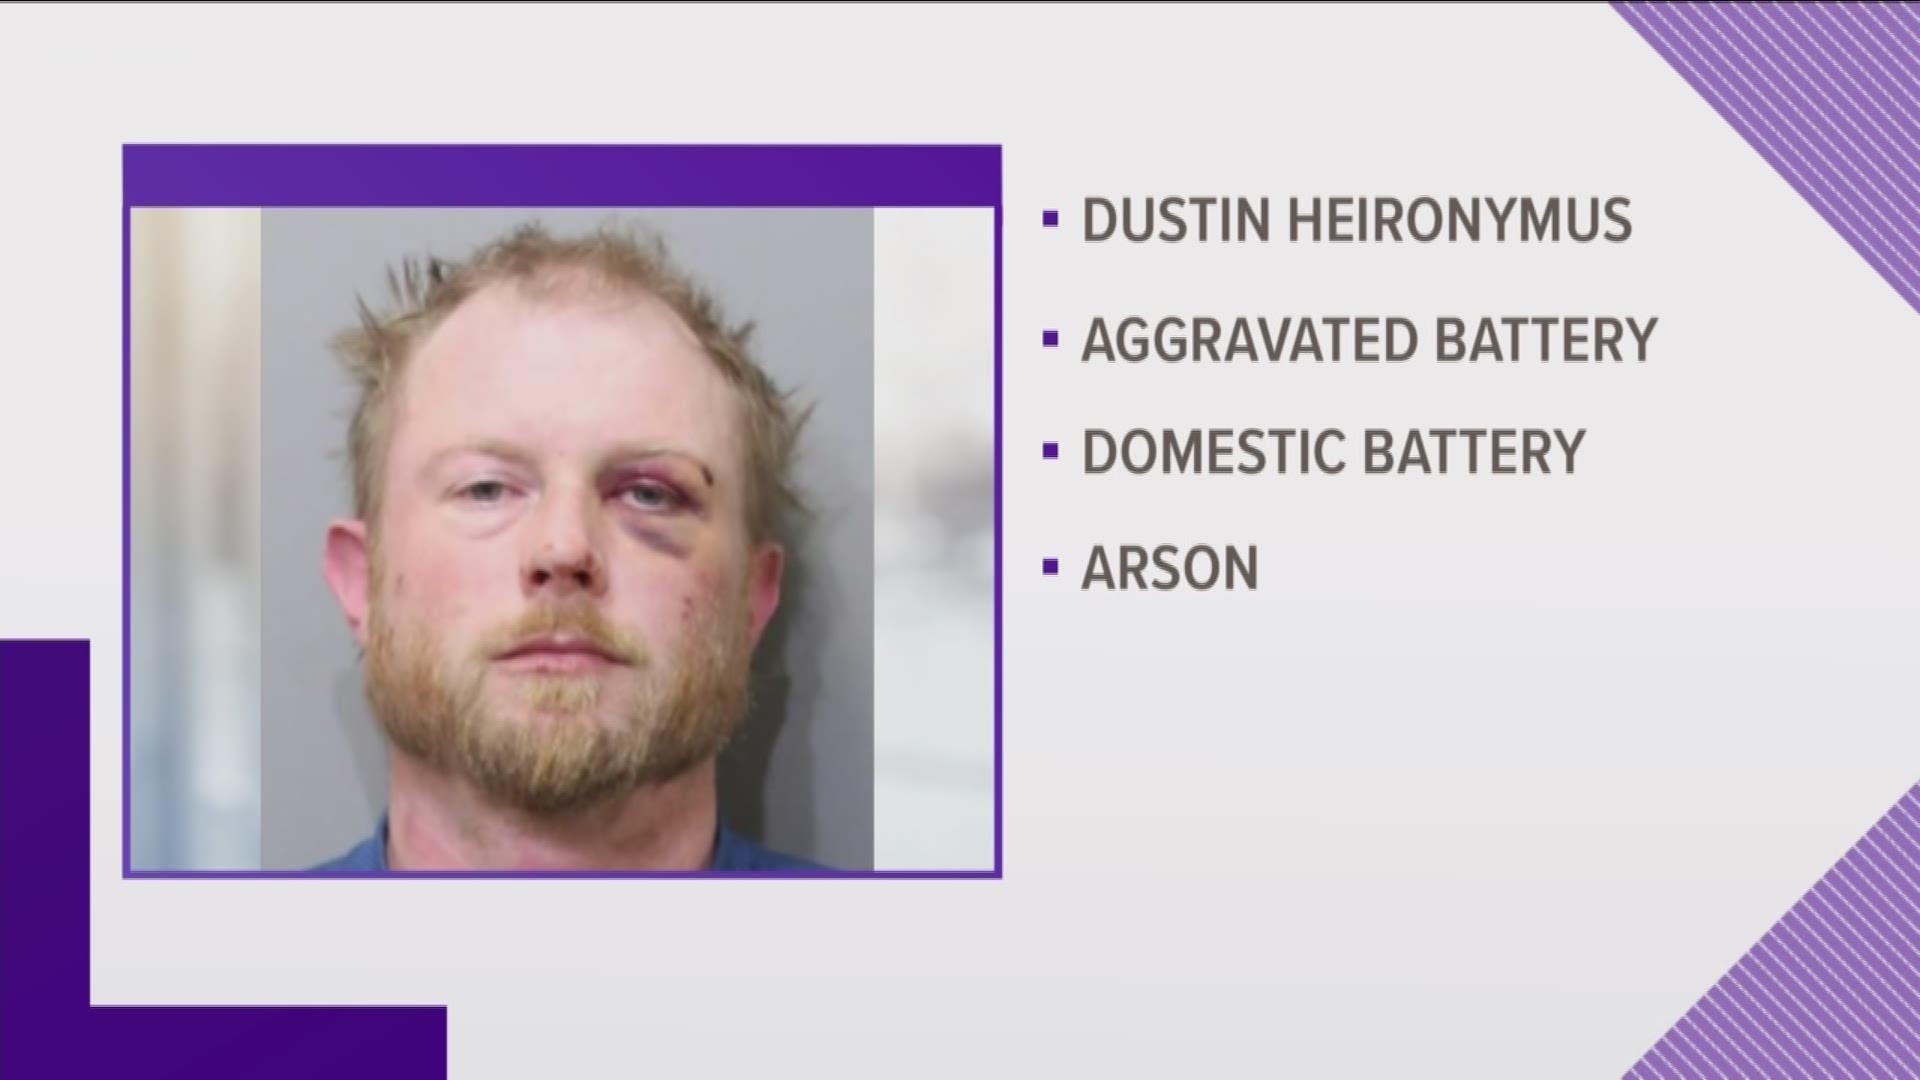 Thirty-eight-year-old Dustin R. Heironymus is charged with arson and battery after prosecutors say he doused his girlfriend with kerosene and lit her on fire.